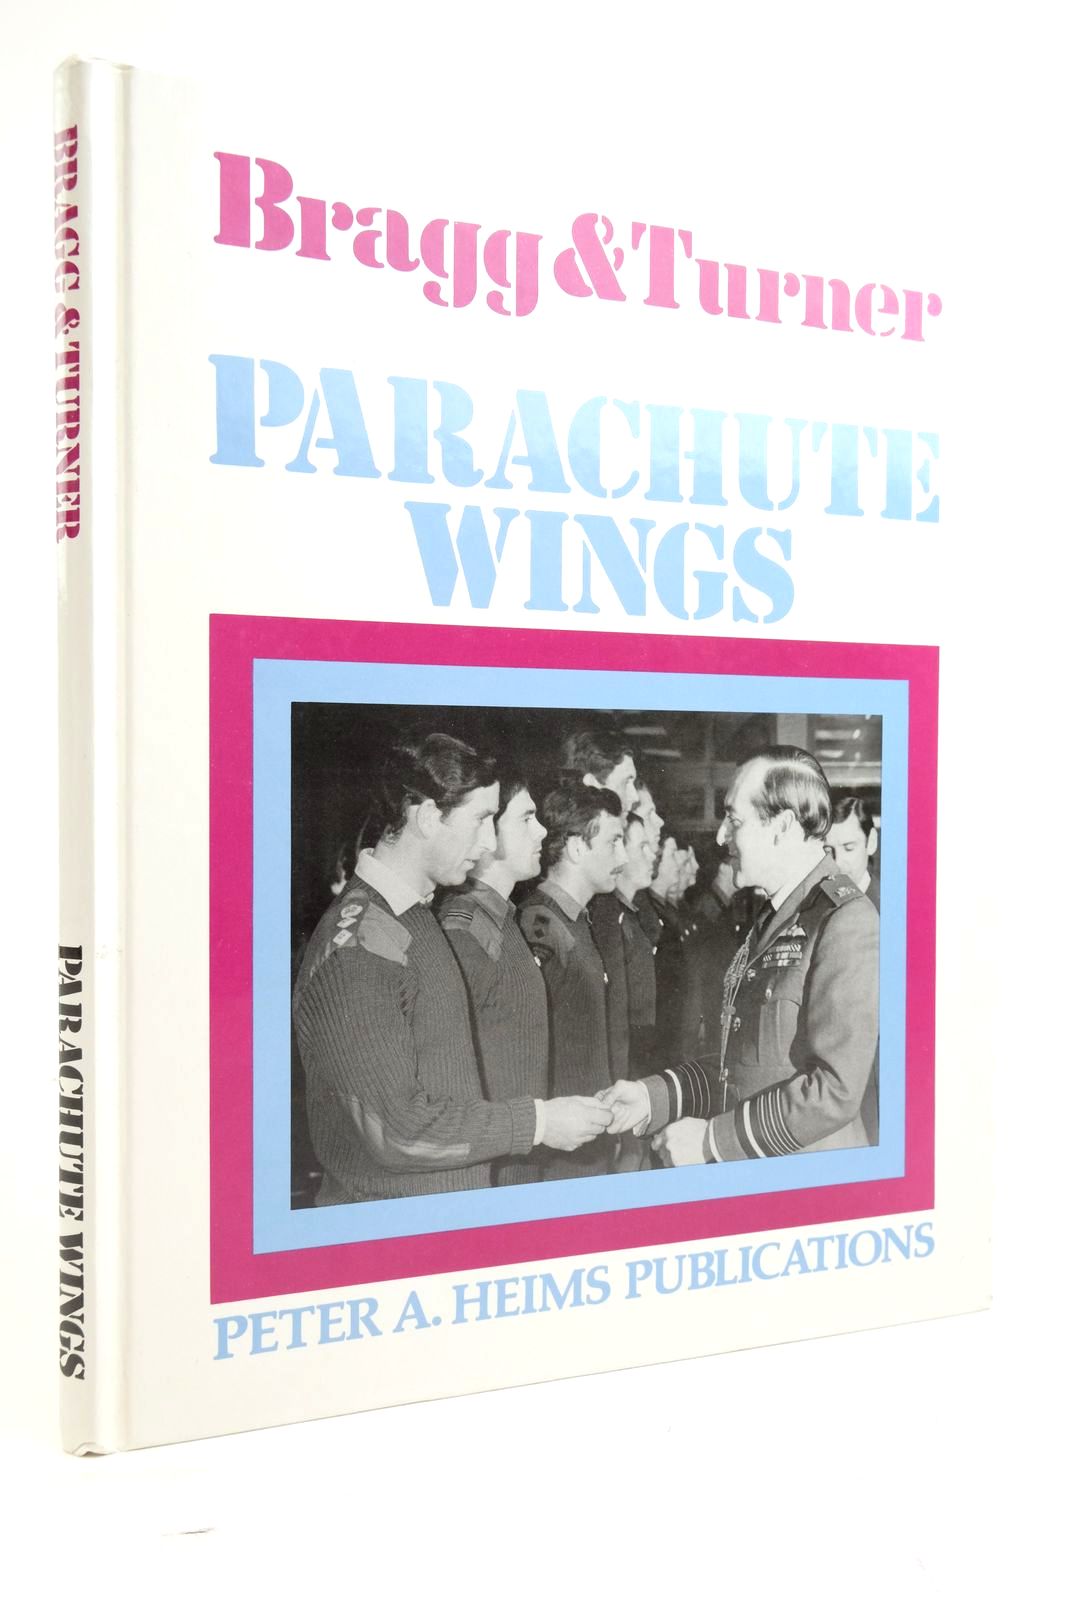 Photo of PARACUTE WINGS written by Bragg, R.J. Turner, Roy published by Peter A. Heims Limited (STOCK CODE: 2136546)  for sale by Stella & Rose's Books